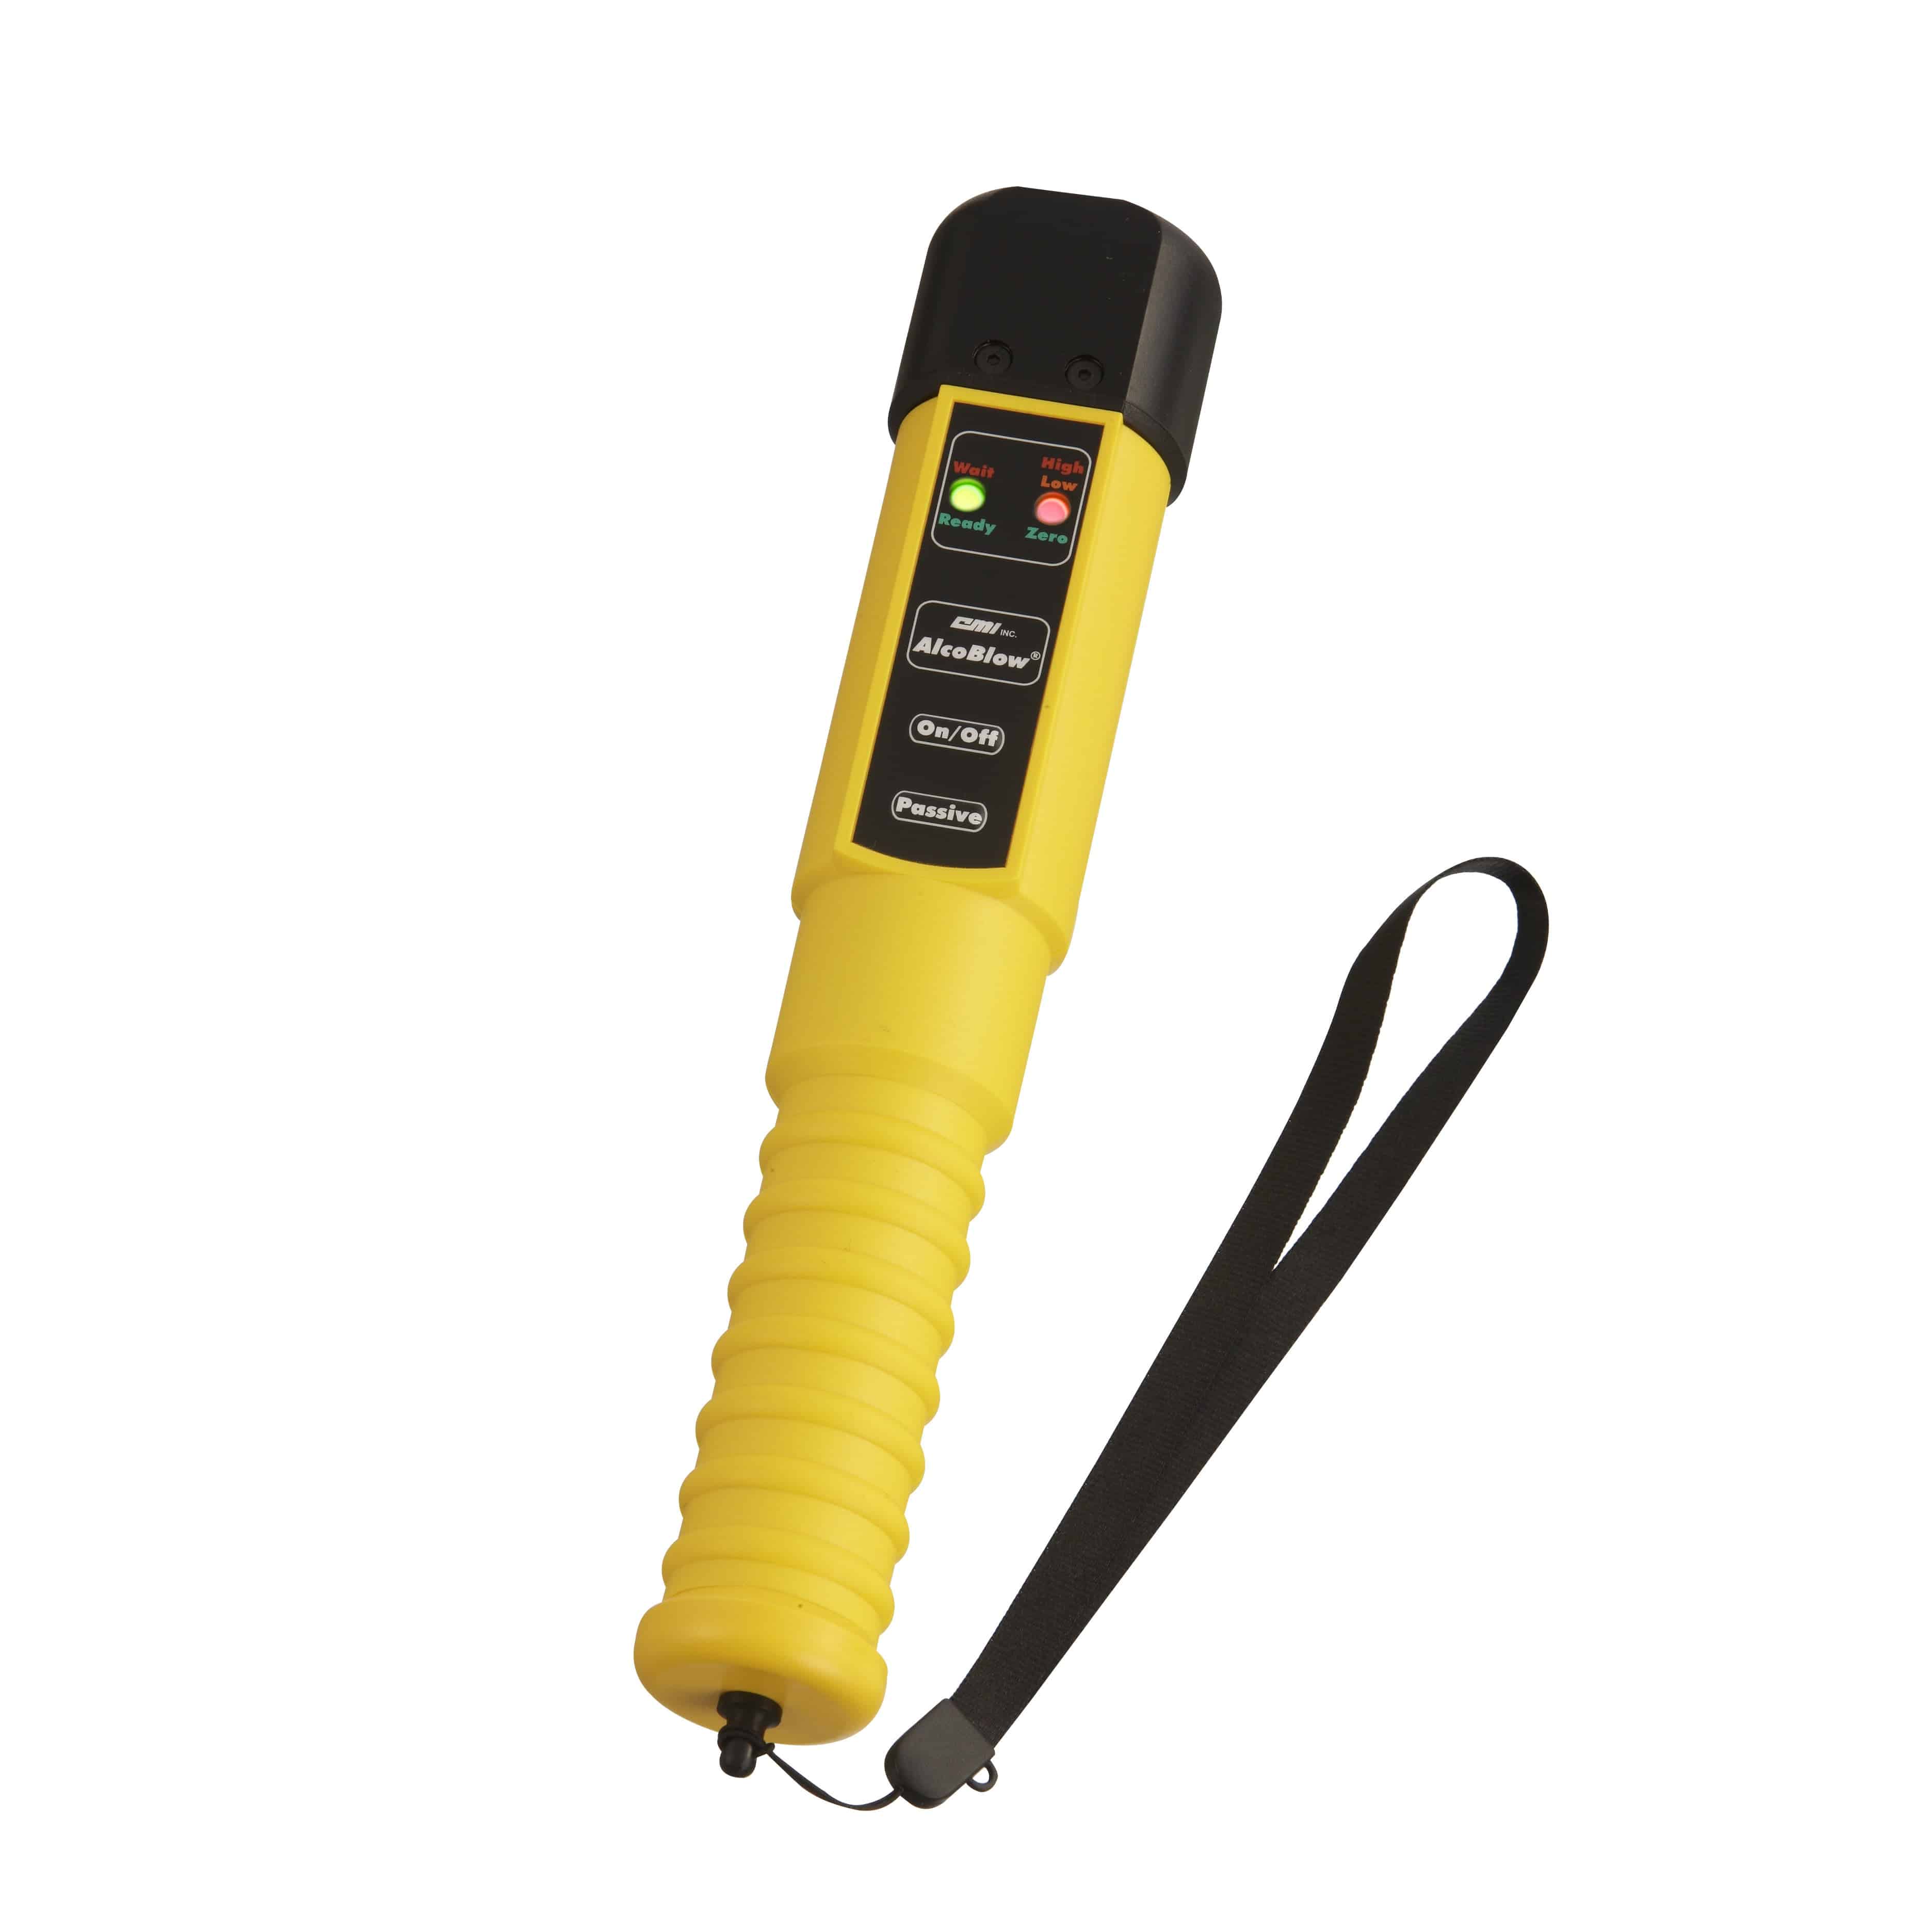 AlcoBlow Handheld Breath Alcohol Tester